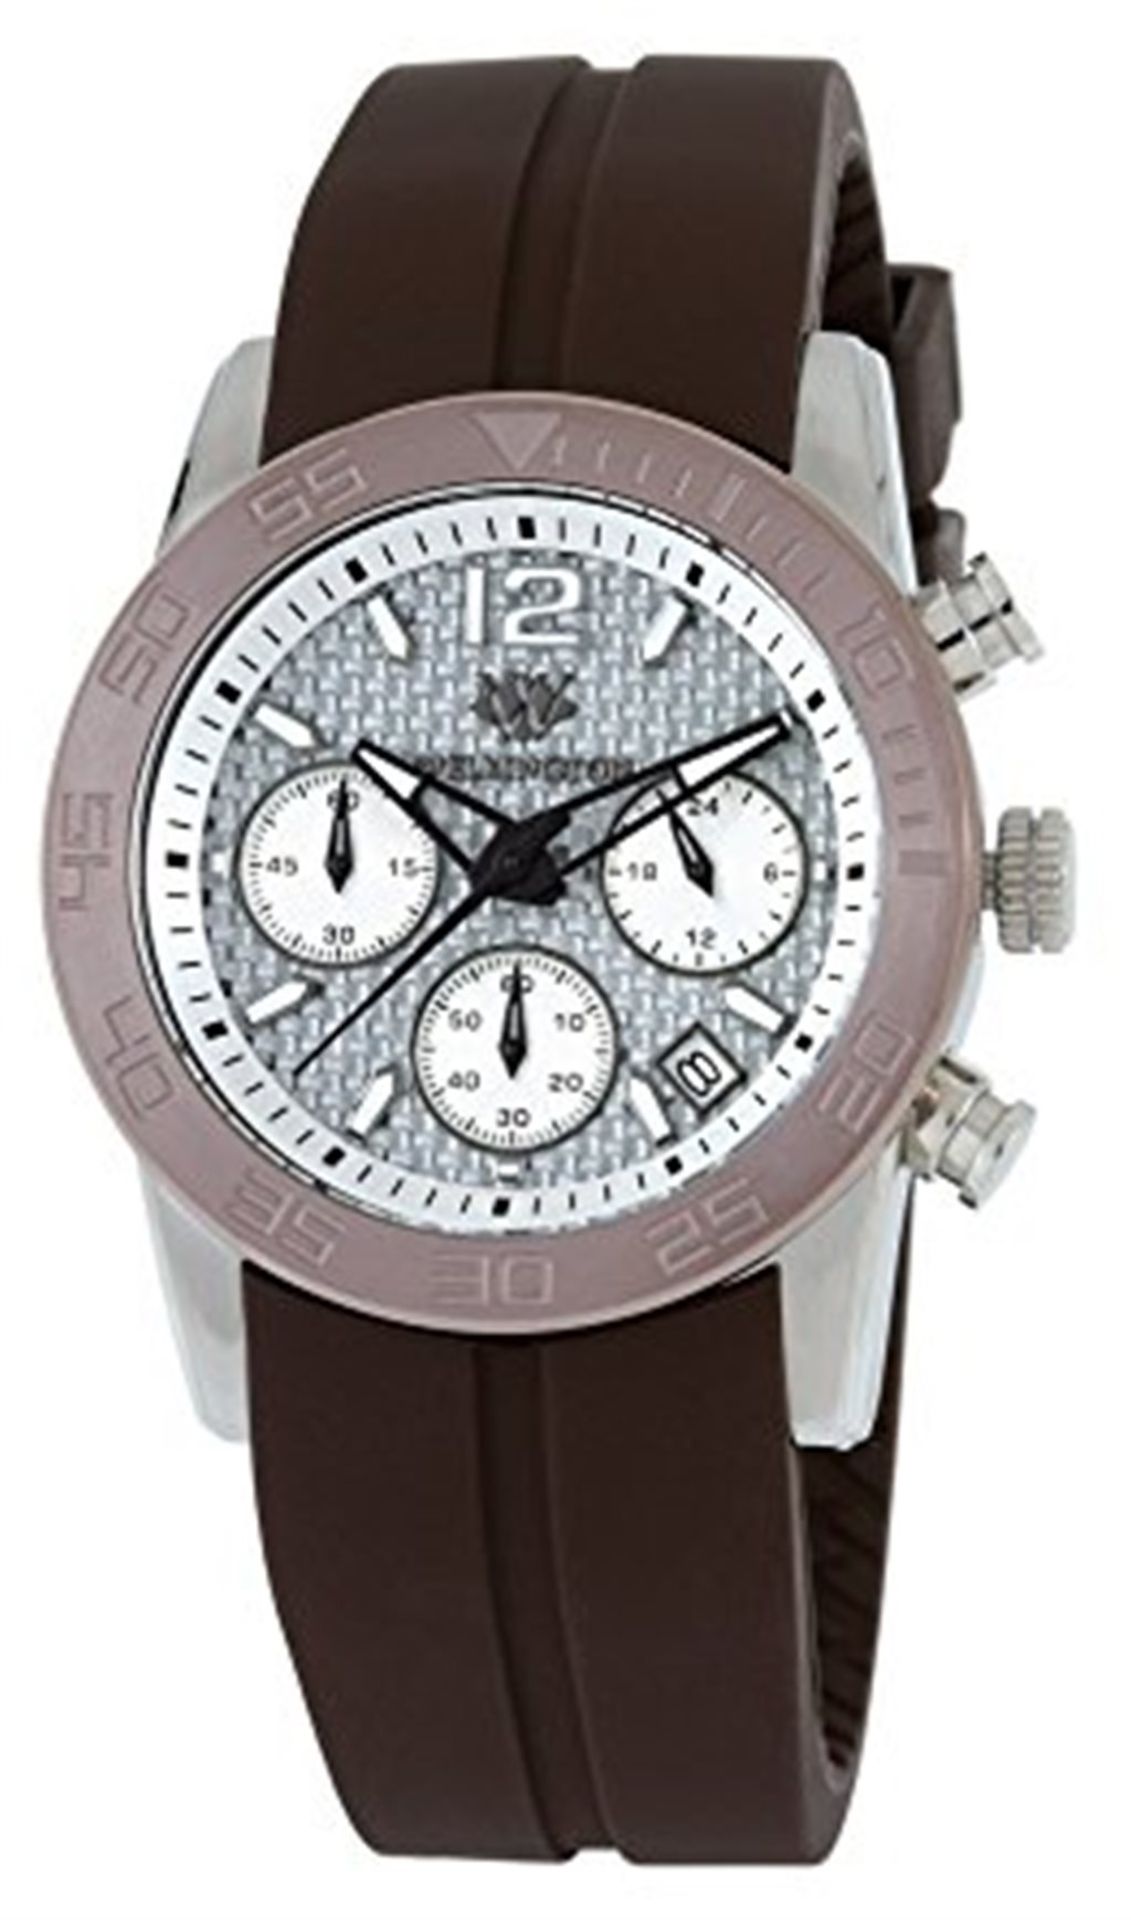 Wellington Ladies Quartz Watch with Silver Dial Analogue Display and Brown Silicone Strap WN503-612 - Image 5 of 5